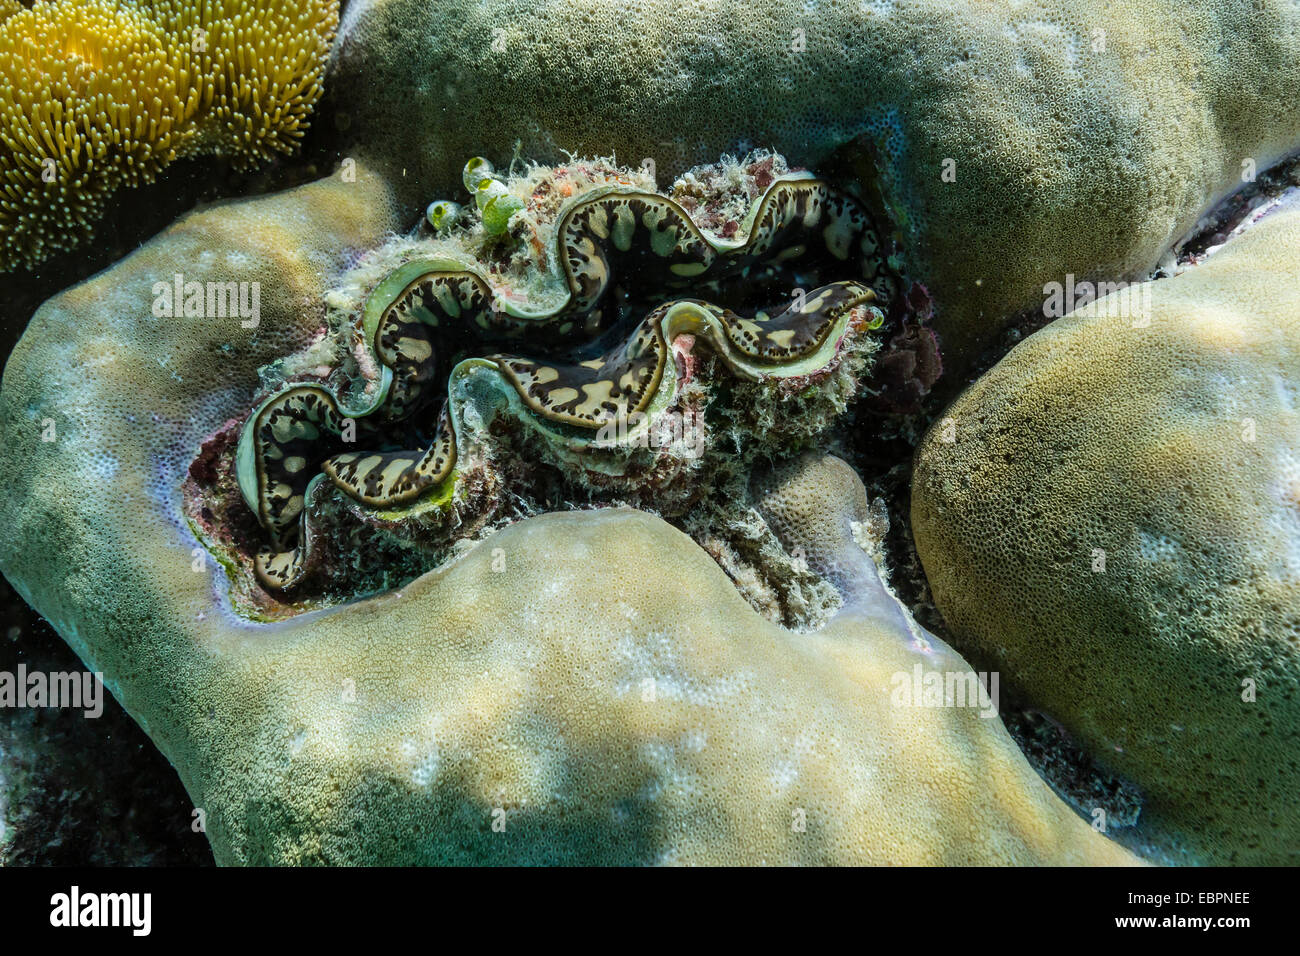 Hard and soft corals and tridacna clam on underwater reef on Jaco Island, Timor Sea, East Timor, Southeast Asia, Asia Stock Photo